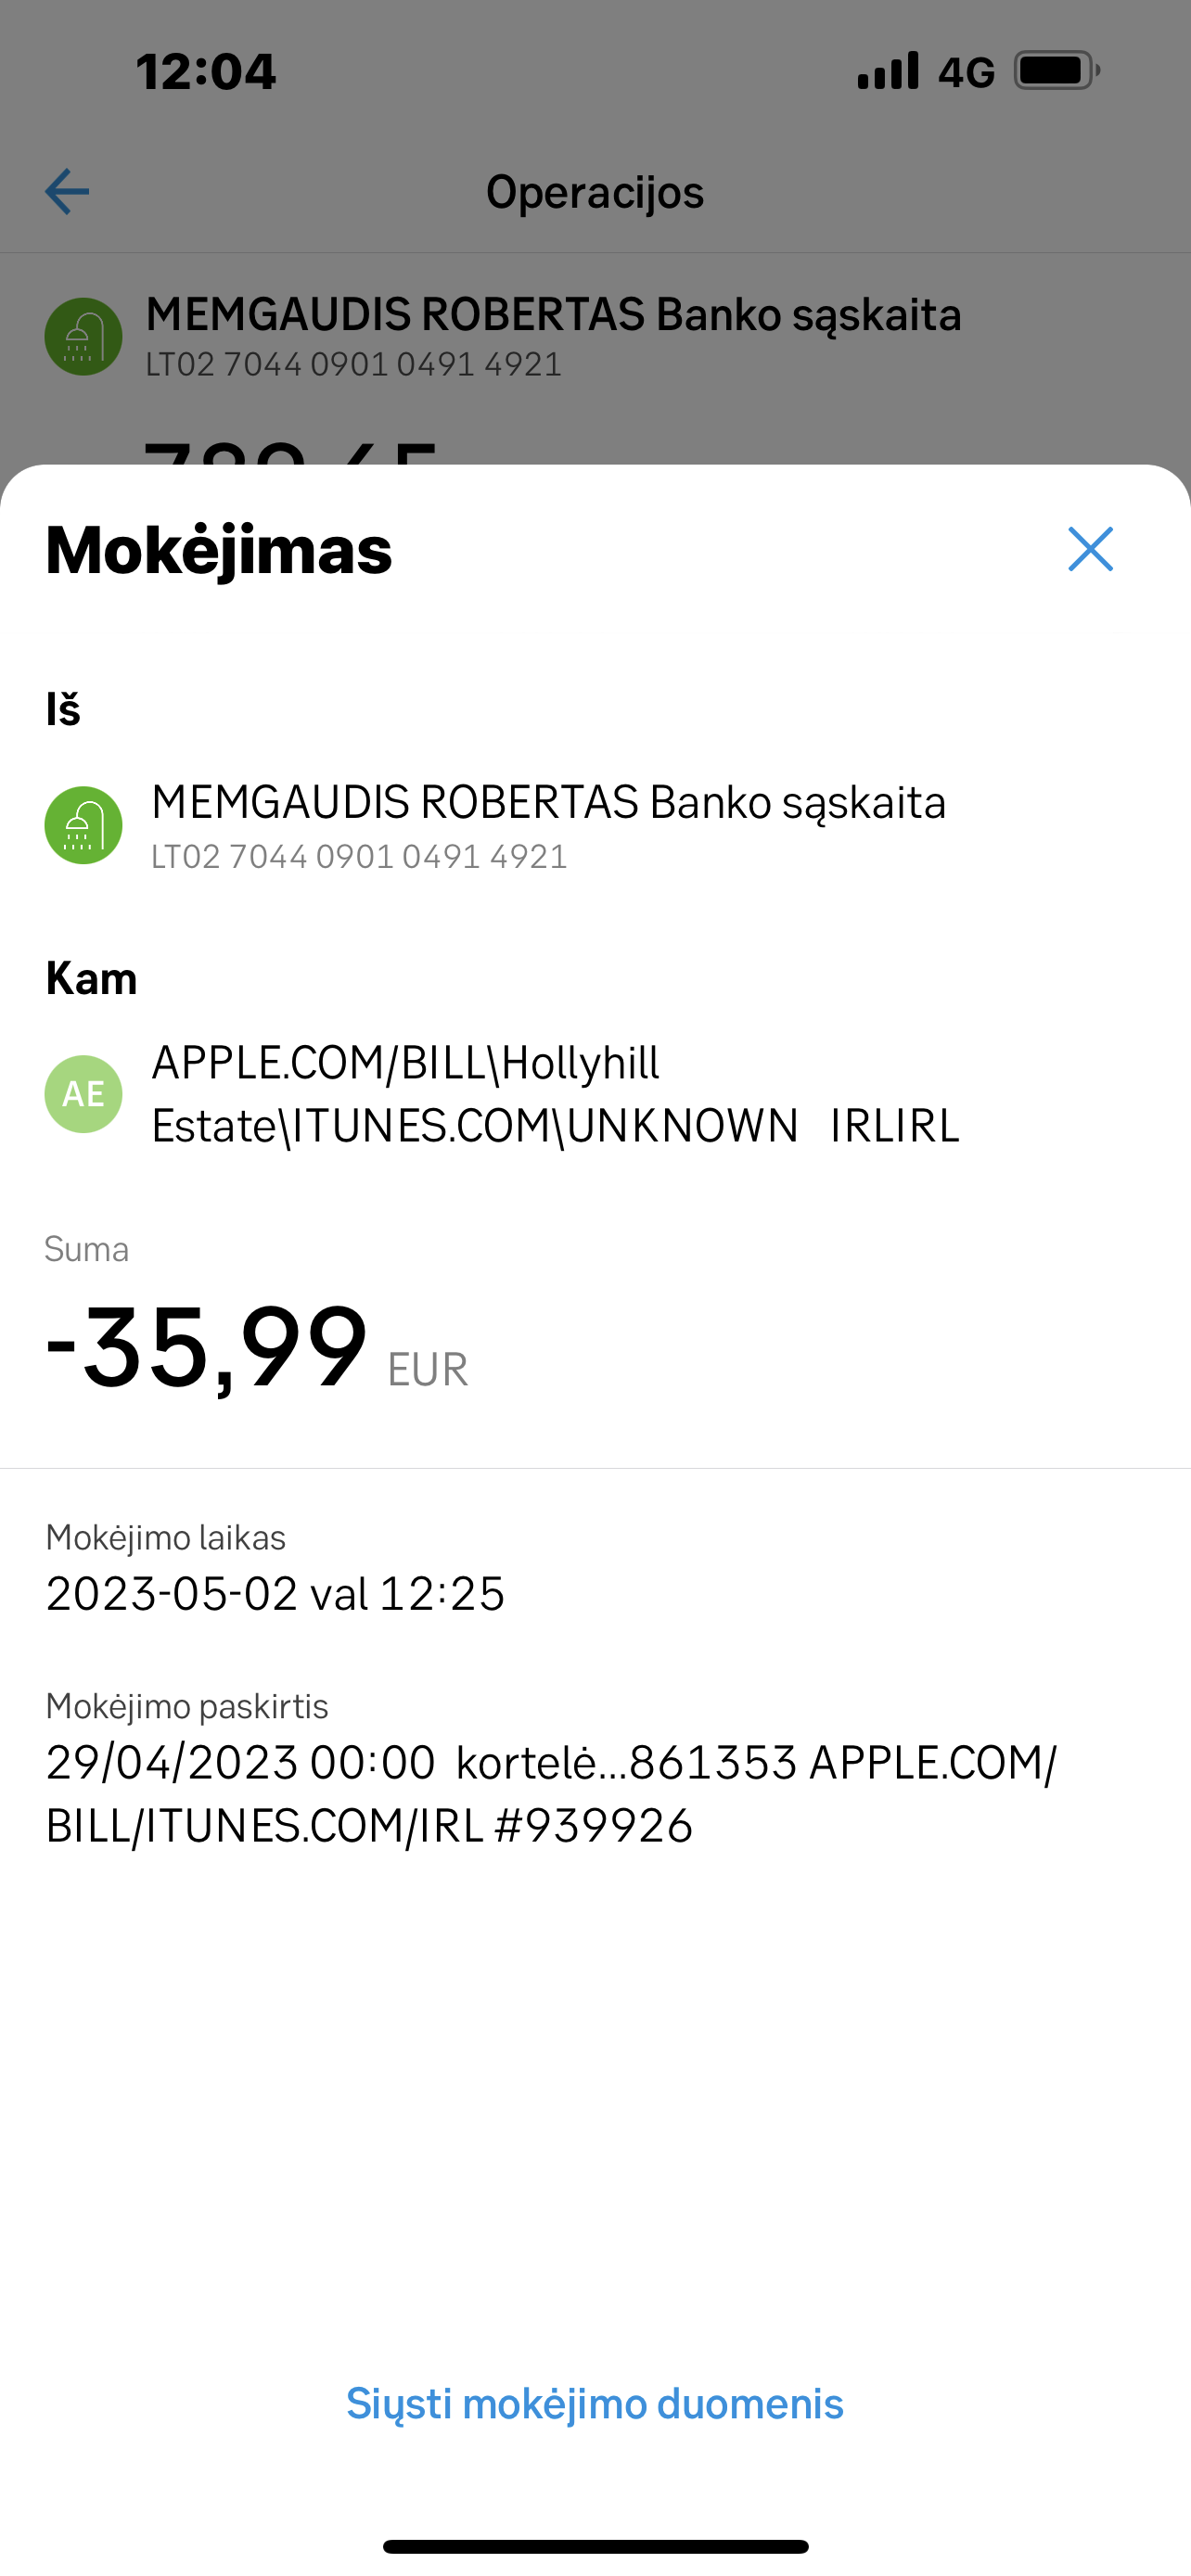 hello I found an unknown purchase from my… - Apple Community